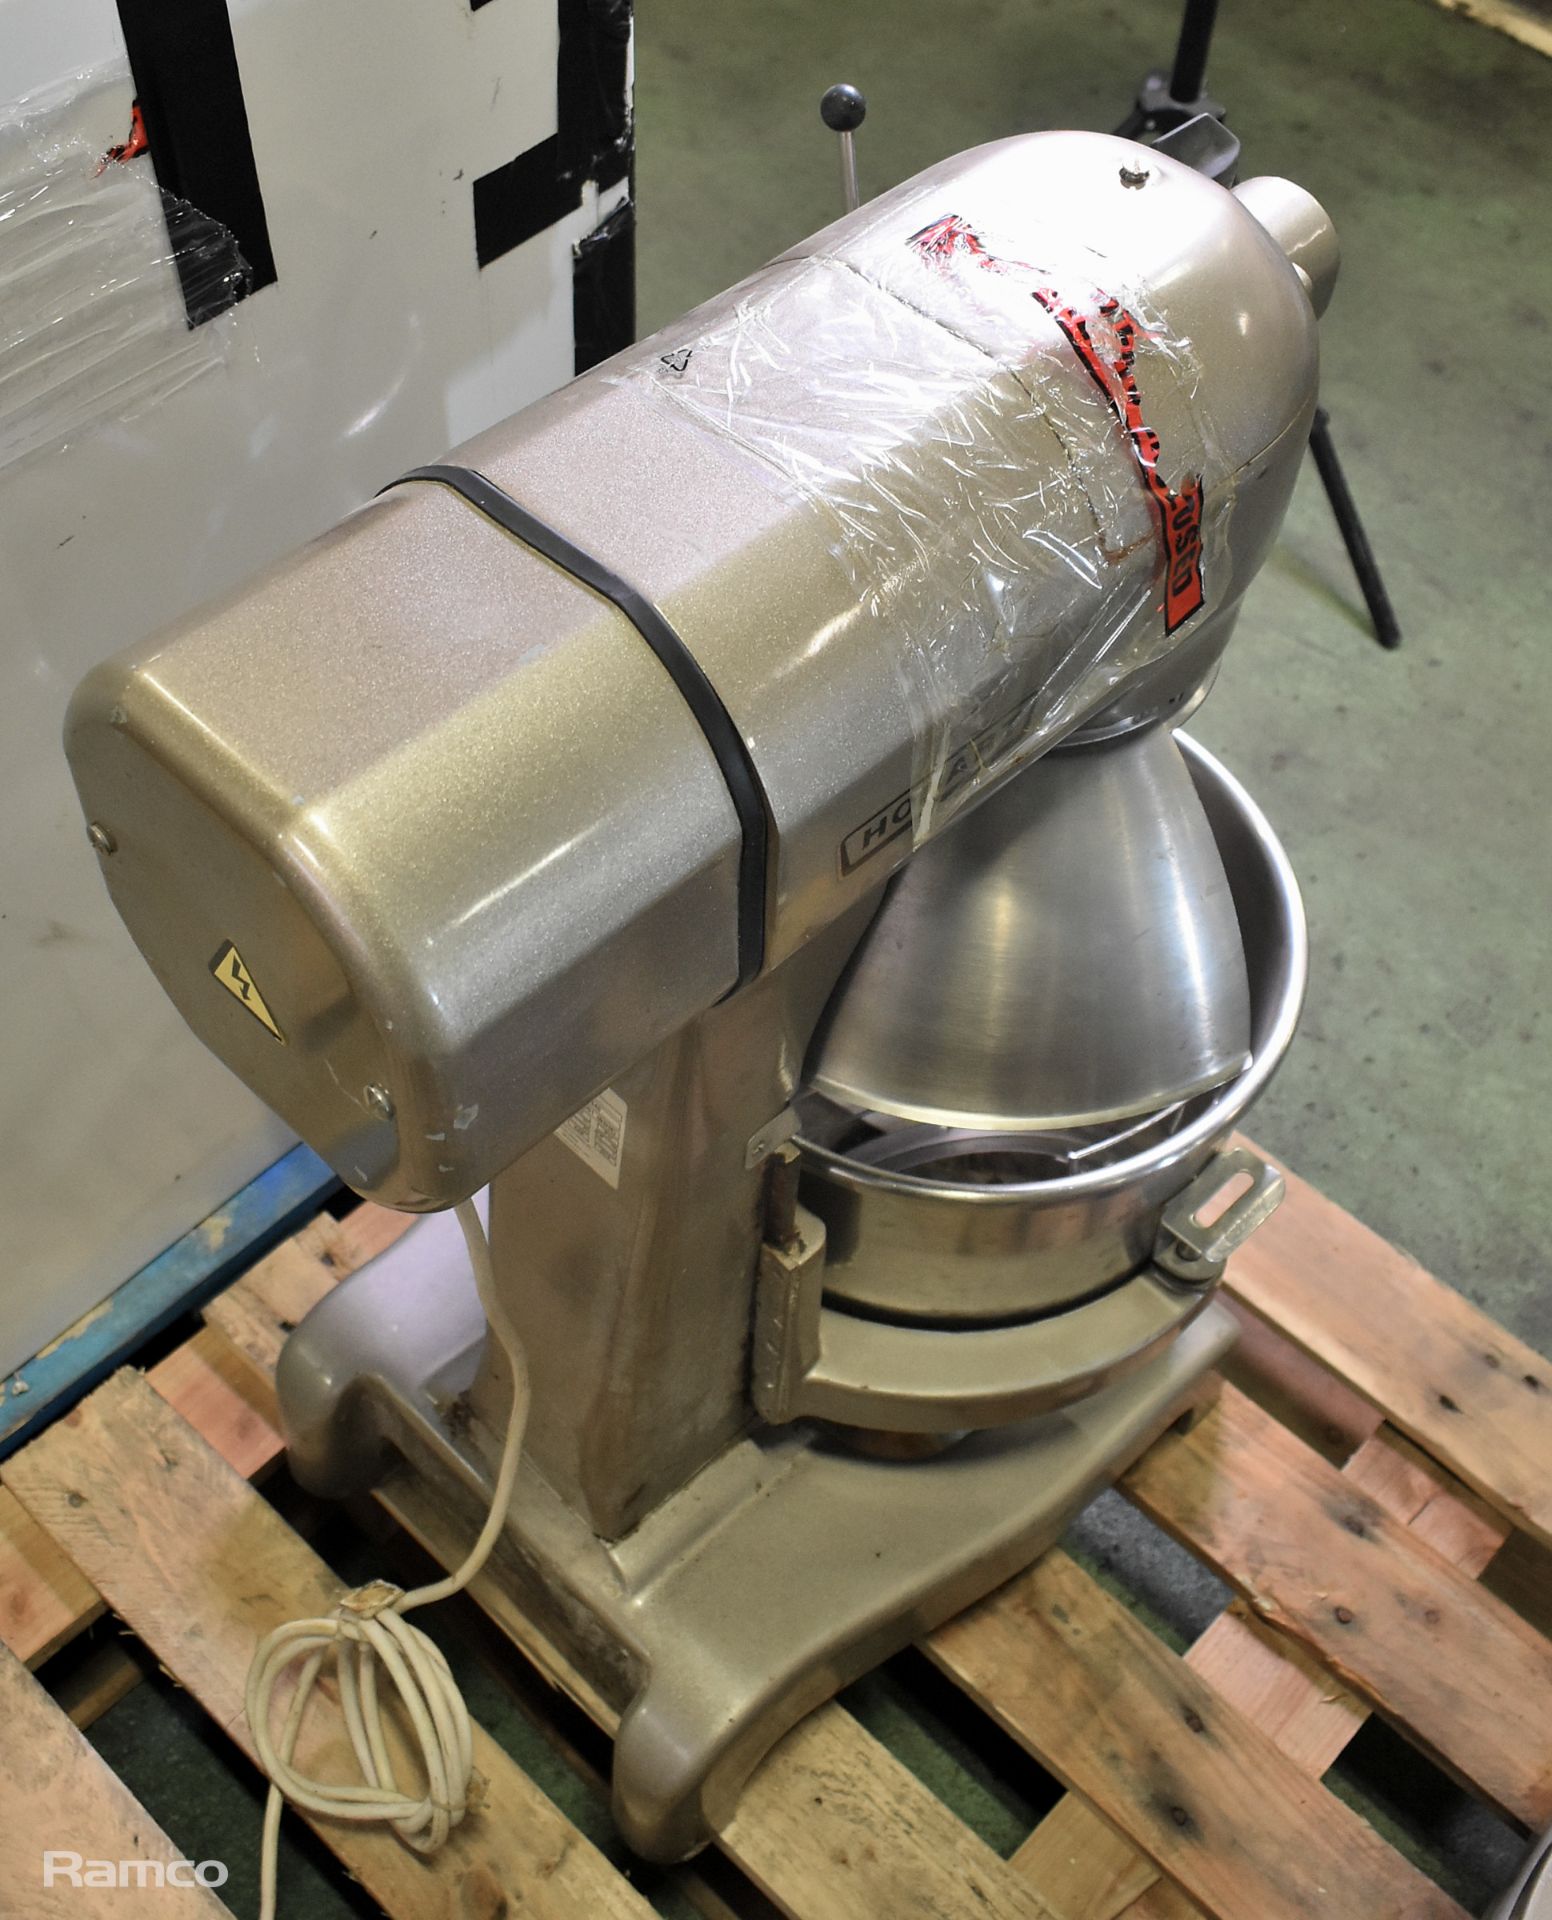 Hobart A200 20L bench mixer with bowl - W 460 x D 560 x H 780mm - Image 5 of 6